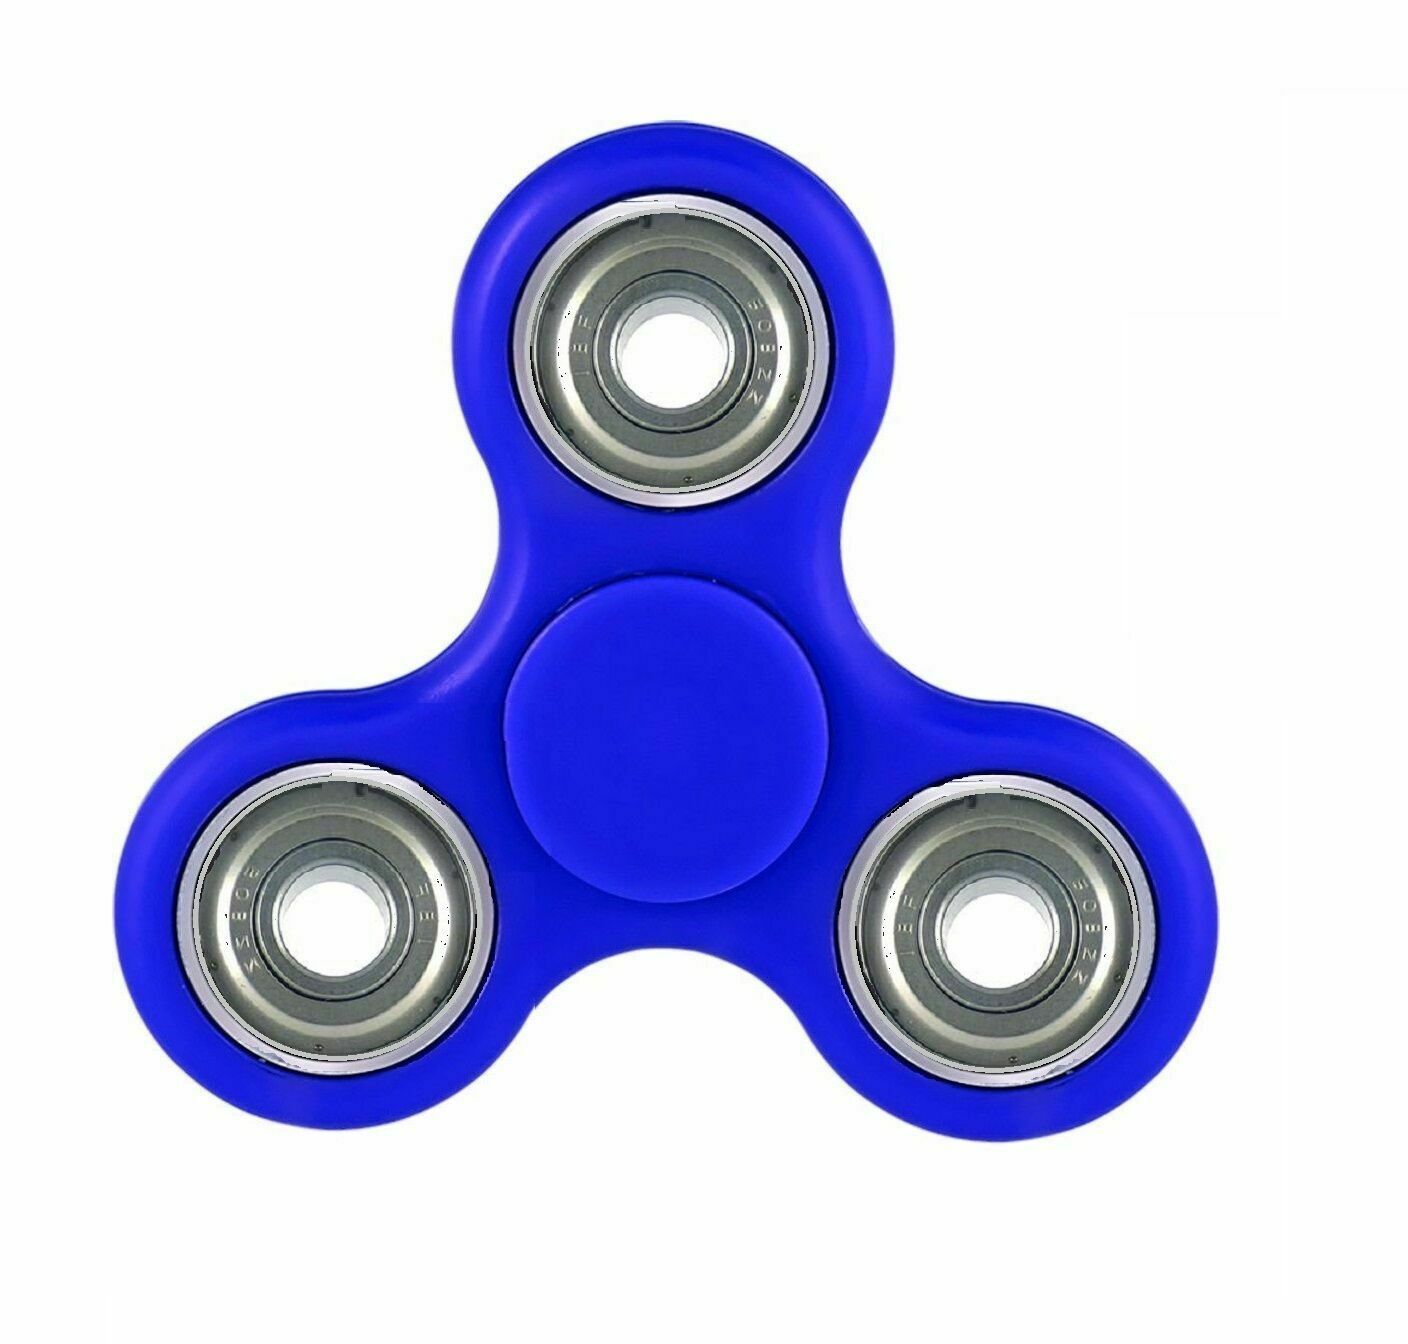 Details about   FIDGET SPINNER HAND FAST BEARING STRESS TOY WHIRLERZ ADHD FINGER FOCUS EDC 